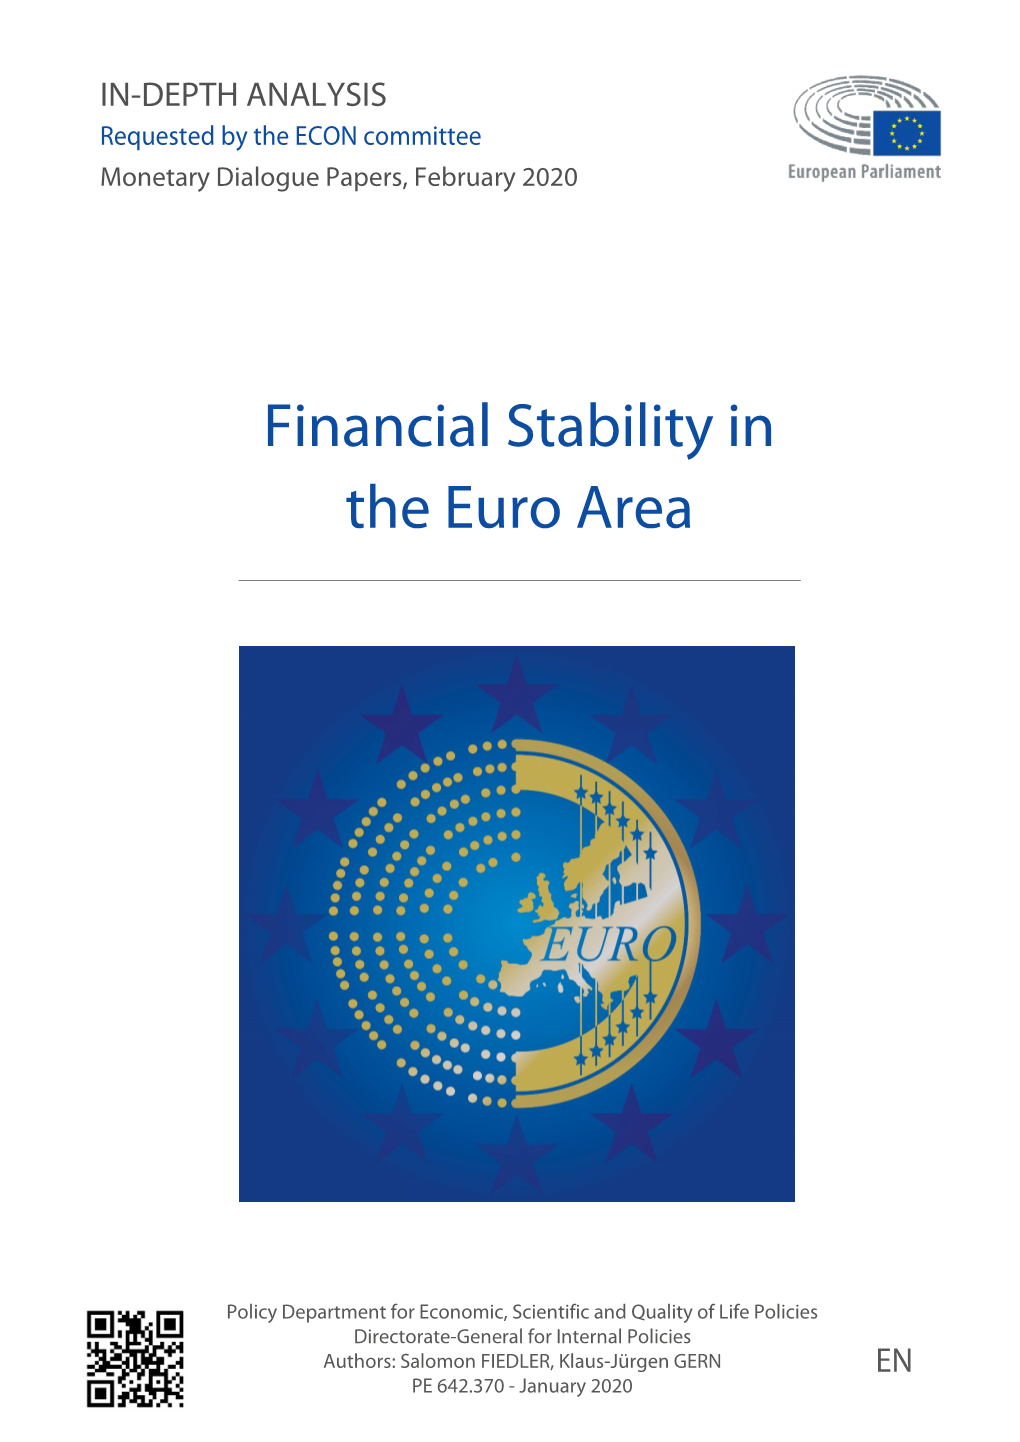 Financial Stability in the Euro Area Appear to Be Contained for the Time Being, but Could Be Substantial in the Longer Run